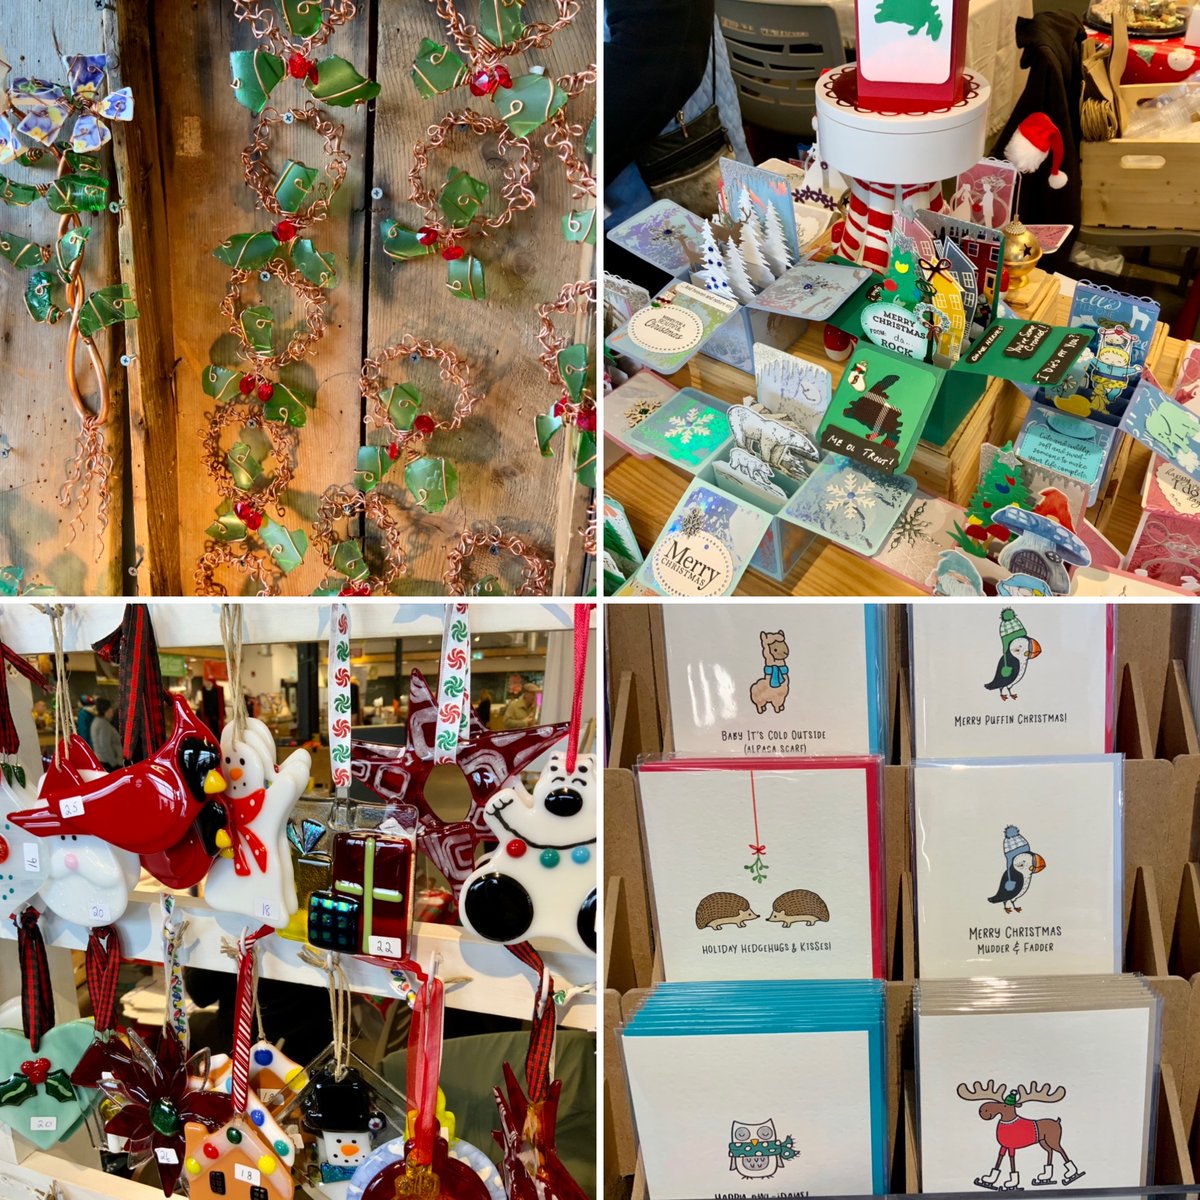 We have all the holiday themed items you need and from local businesses! #sjfmnl #sjfm #holidayitems #holidaygiftideas #stjohns #supportlocalbusinesses